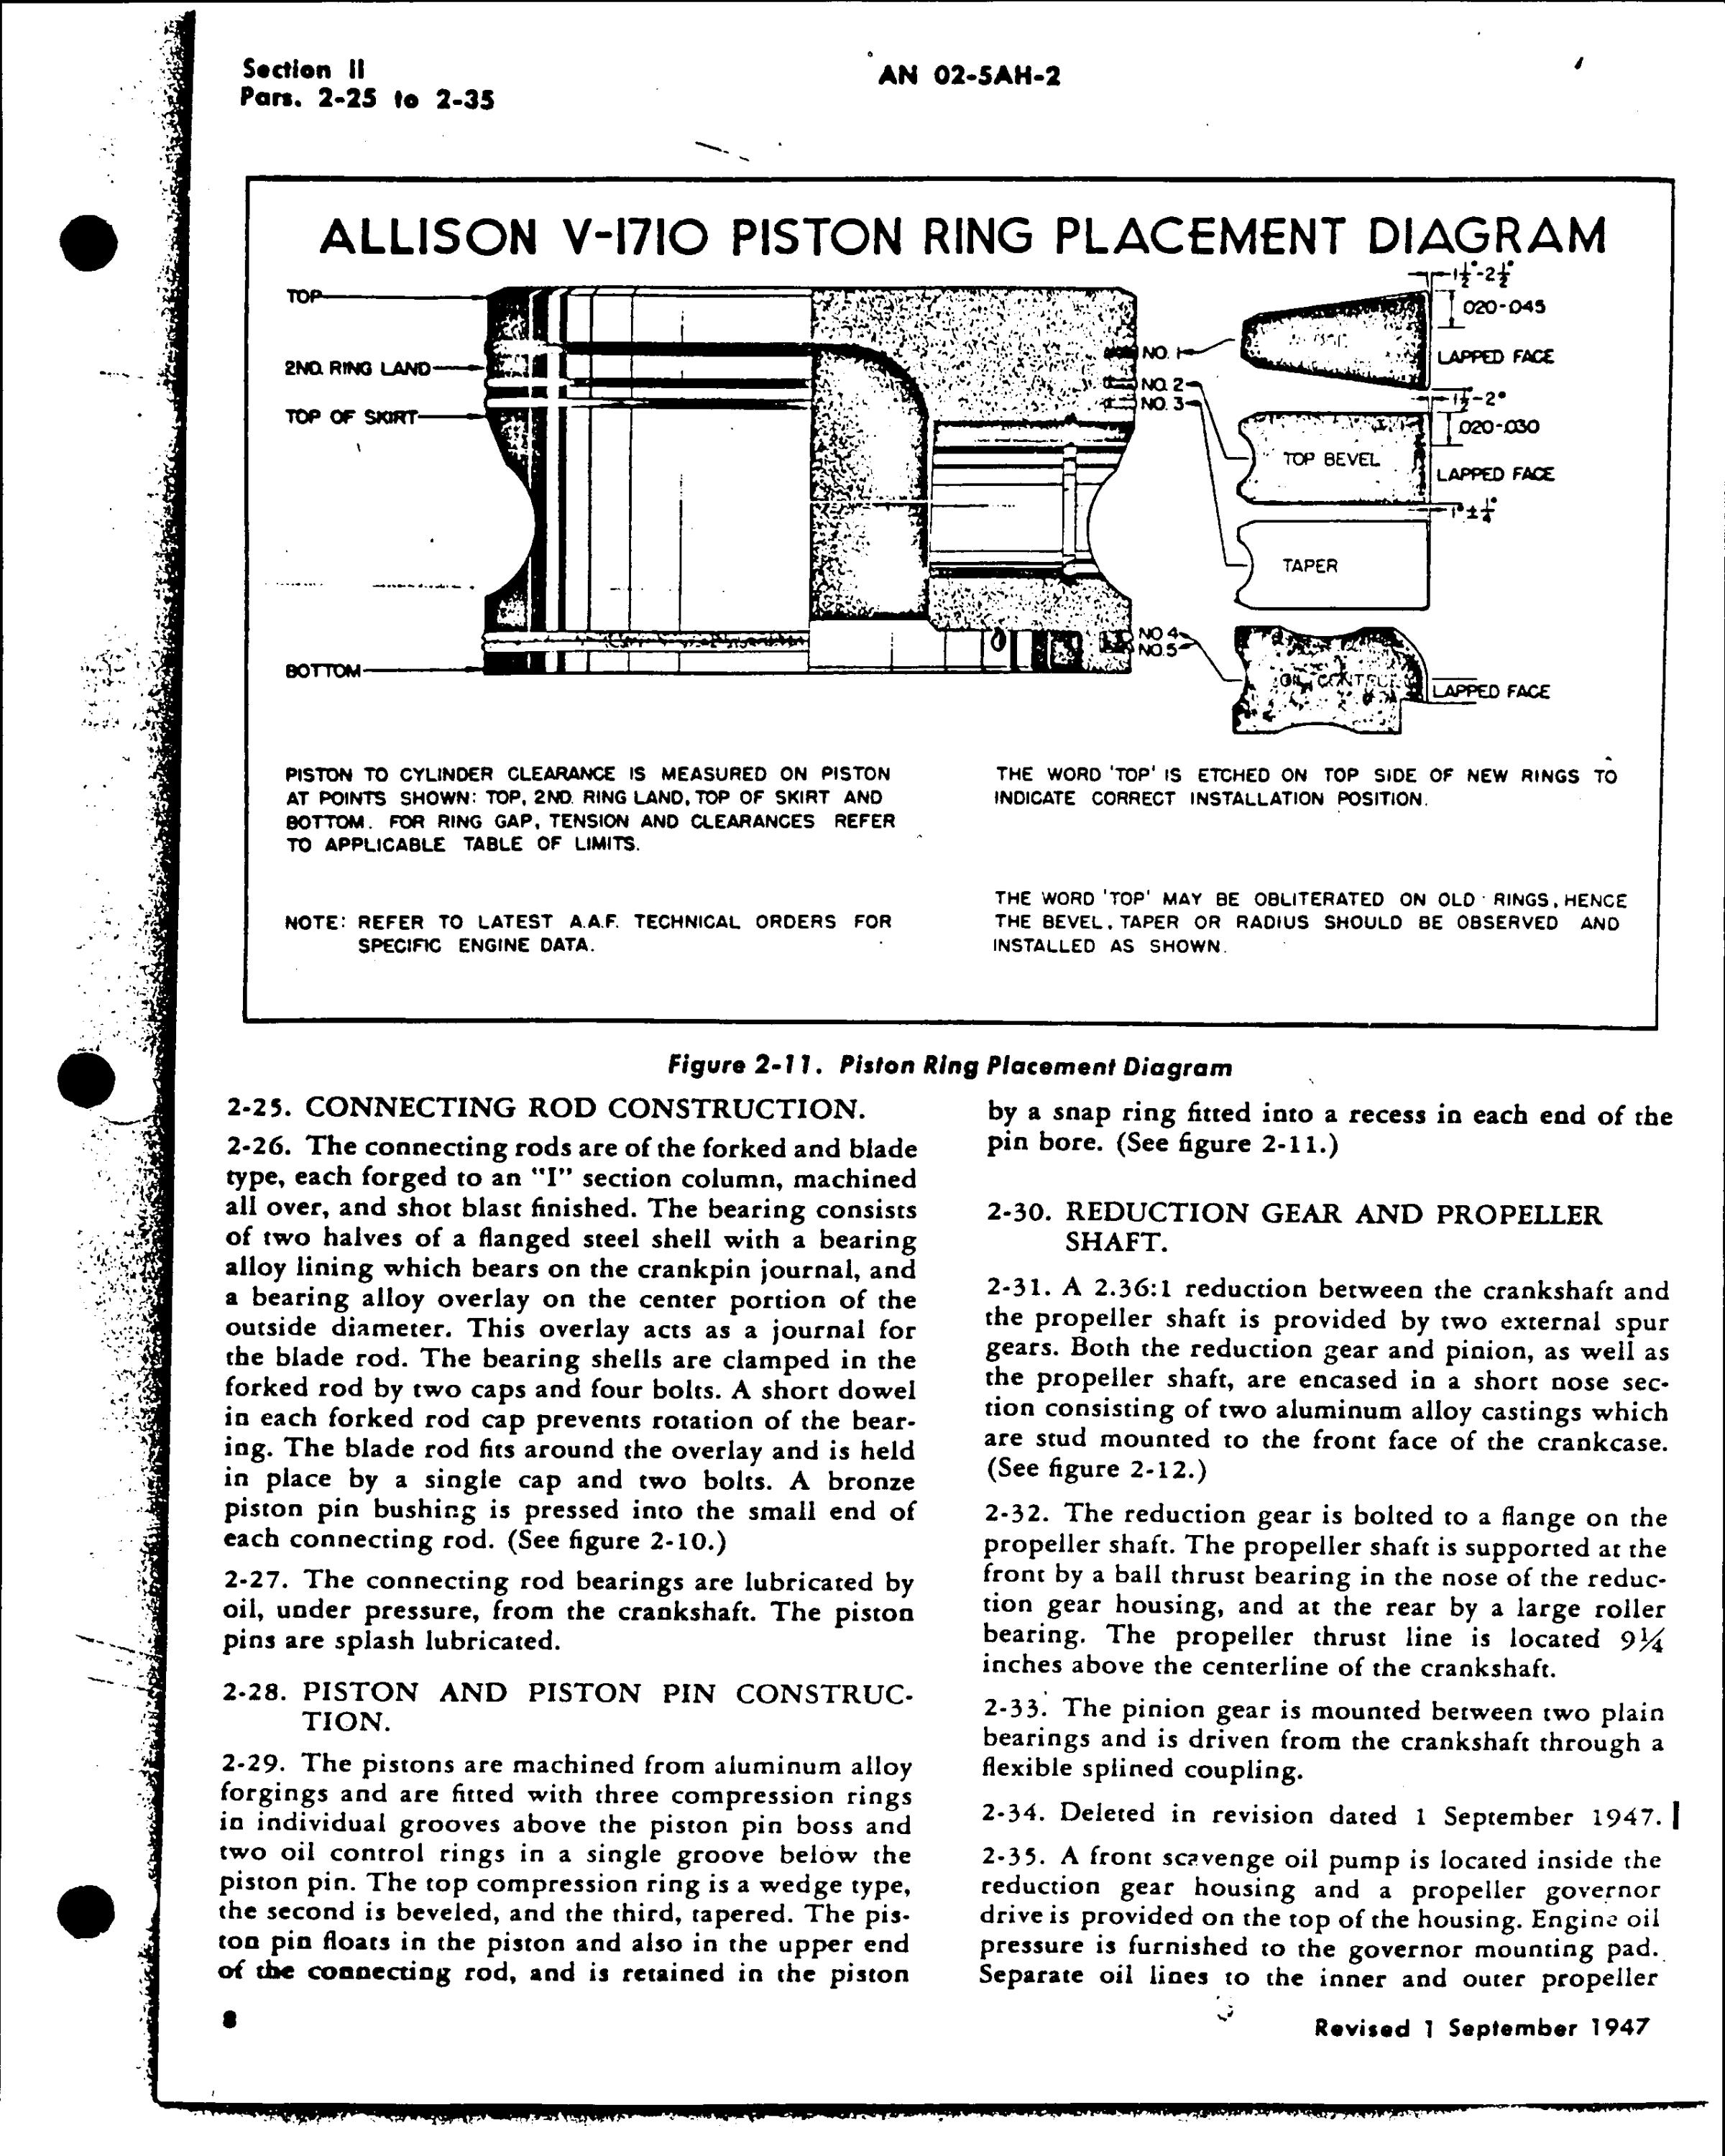 Sample page 12 from AirCorps Library document: Handbook Service Instructions for Models V-1710-143 and -145 Aircraft Engines